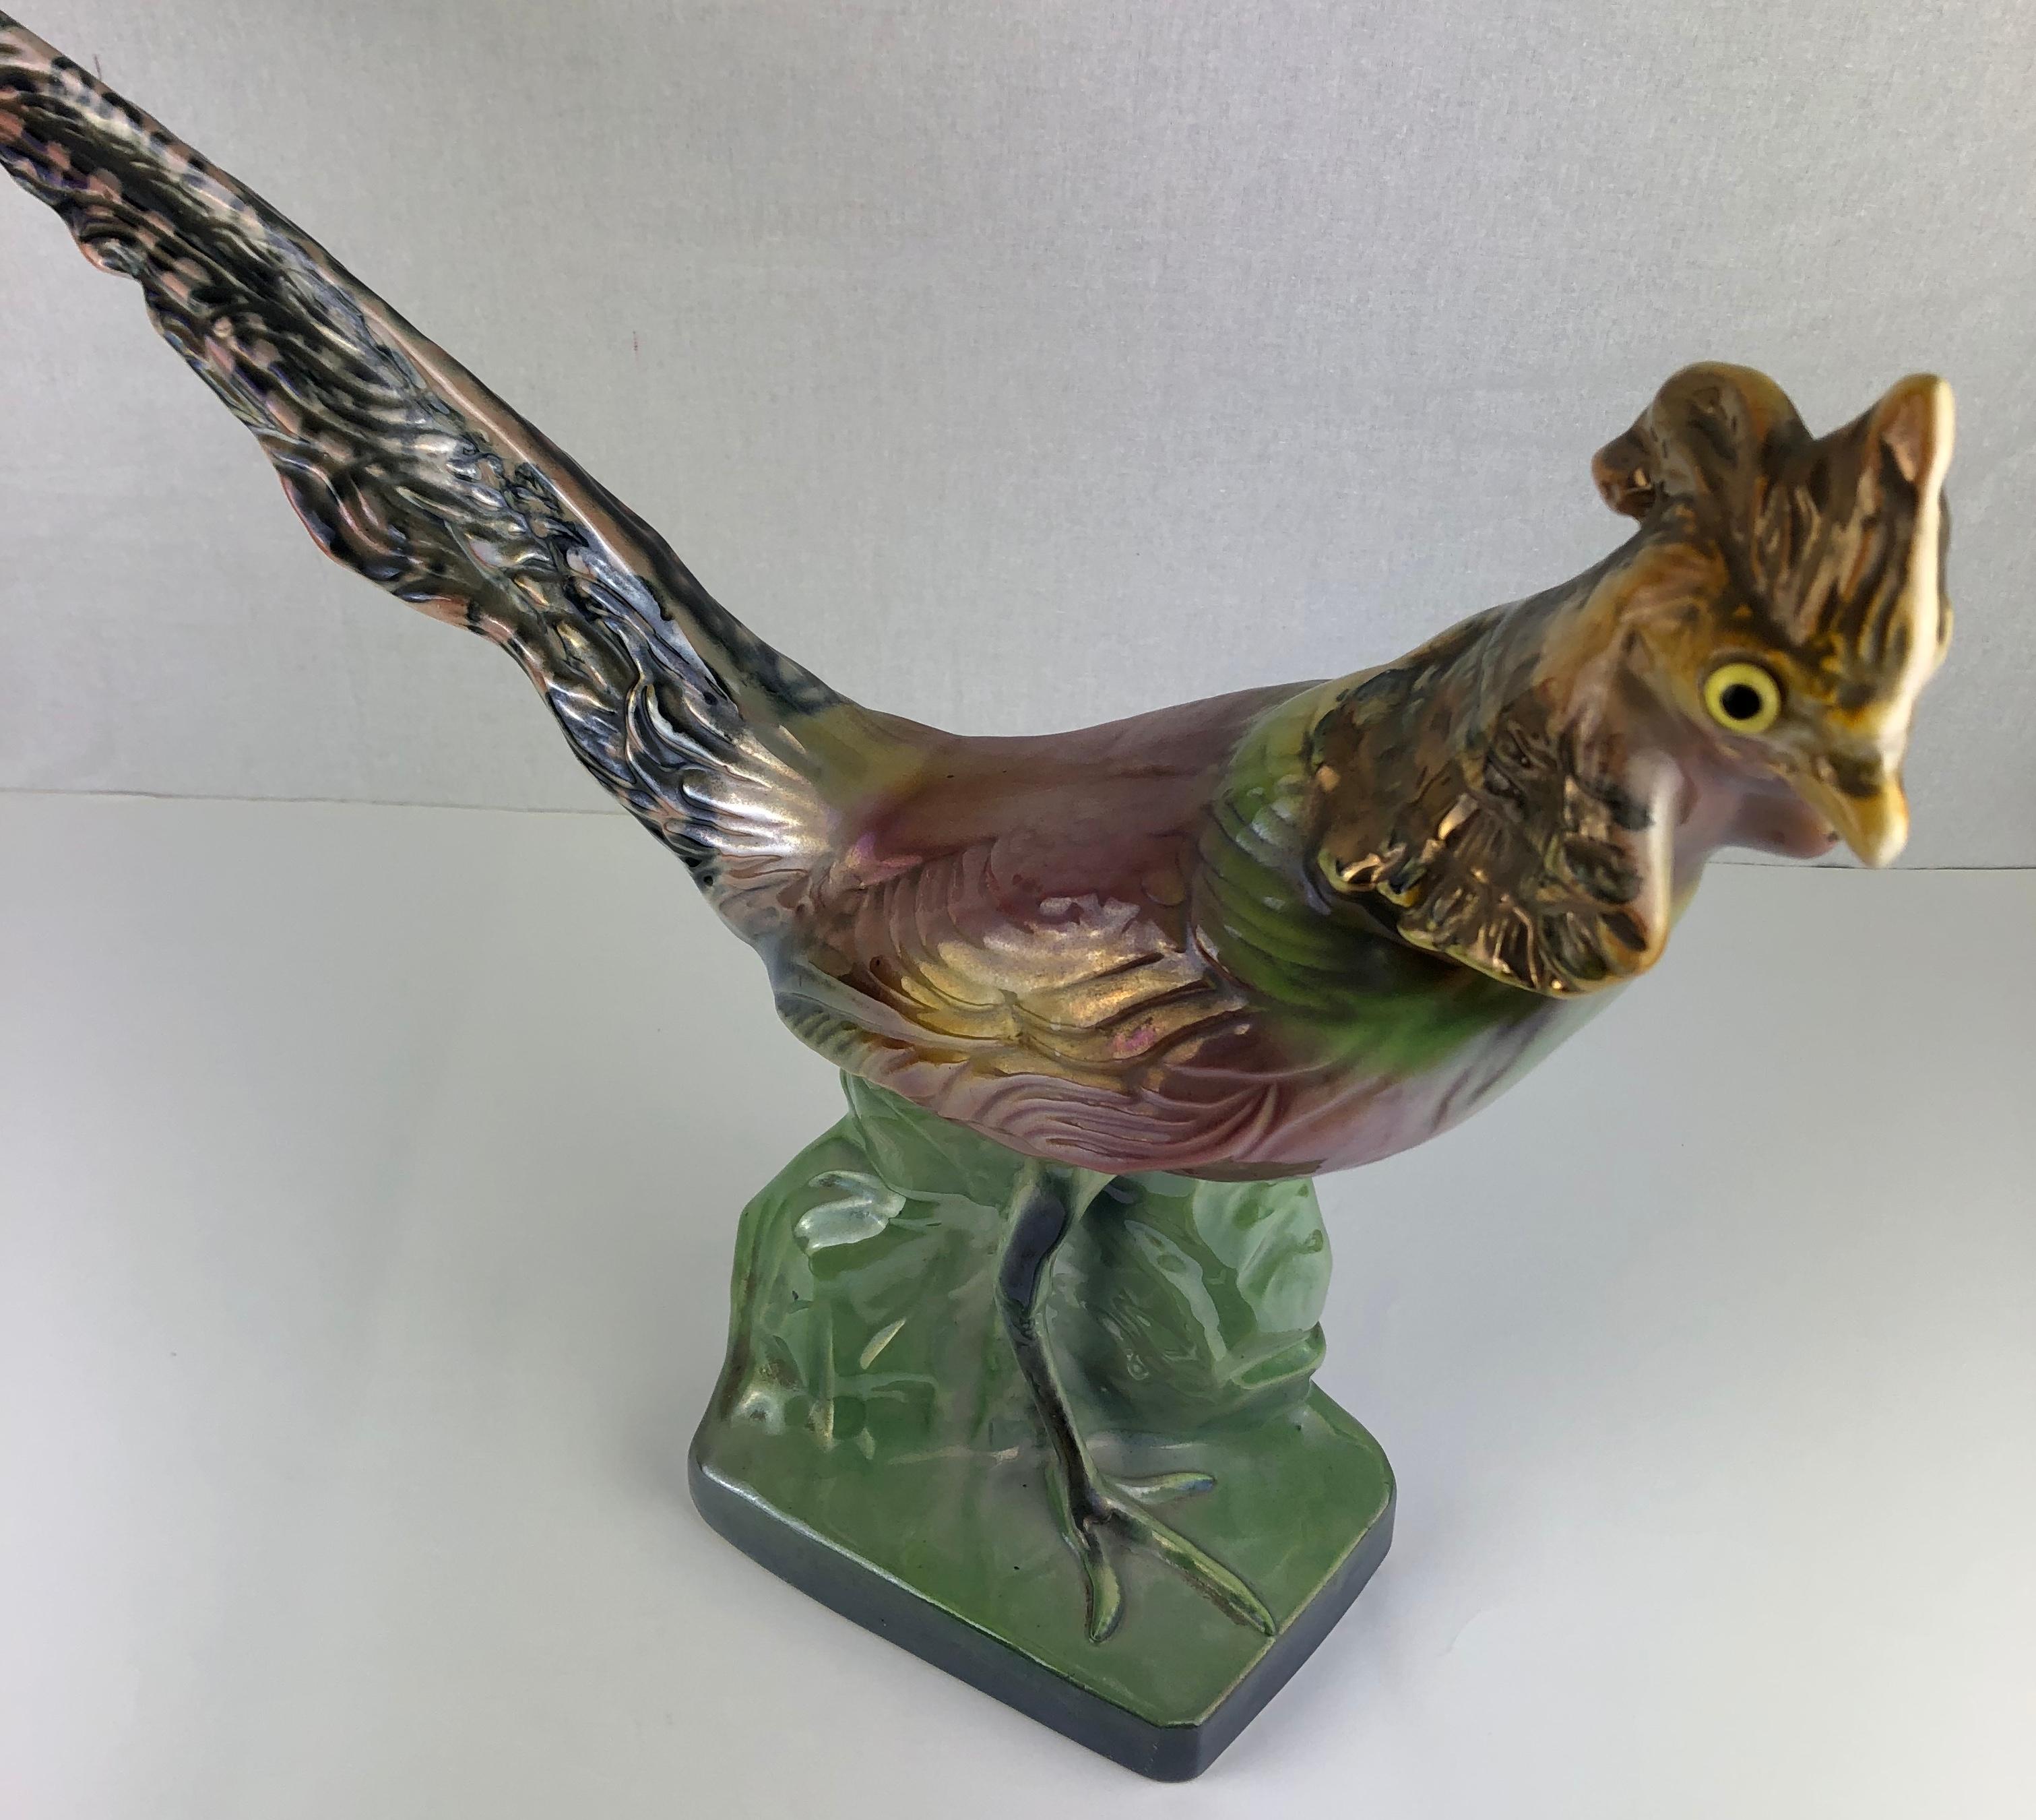 Sculpted and hand painted pheasant figure with stunning colors and details. 

H. Bequet began creating beautiful ceramics in 1926 at the Belgian ceramics manufacturer Auguste Mouzin et Cie (AMC). Bequet opened his own ceramics production factory